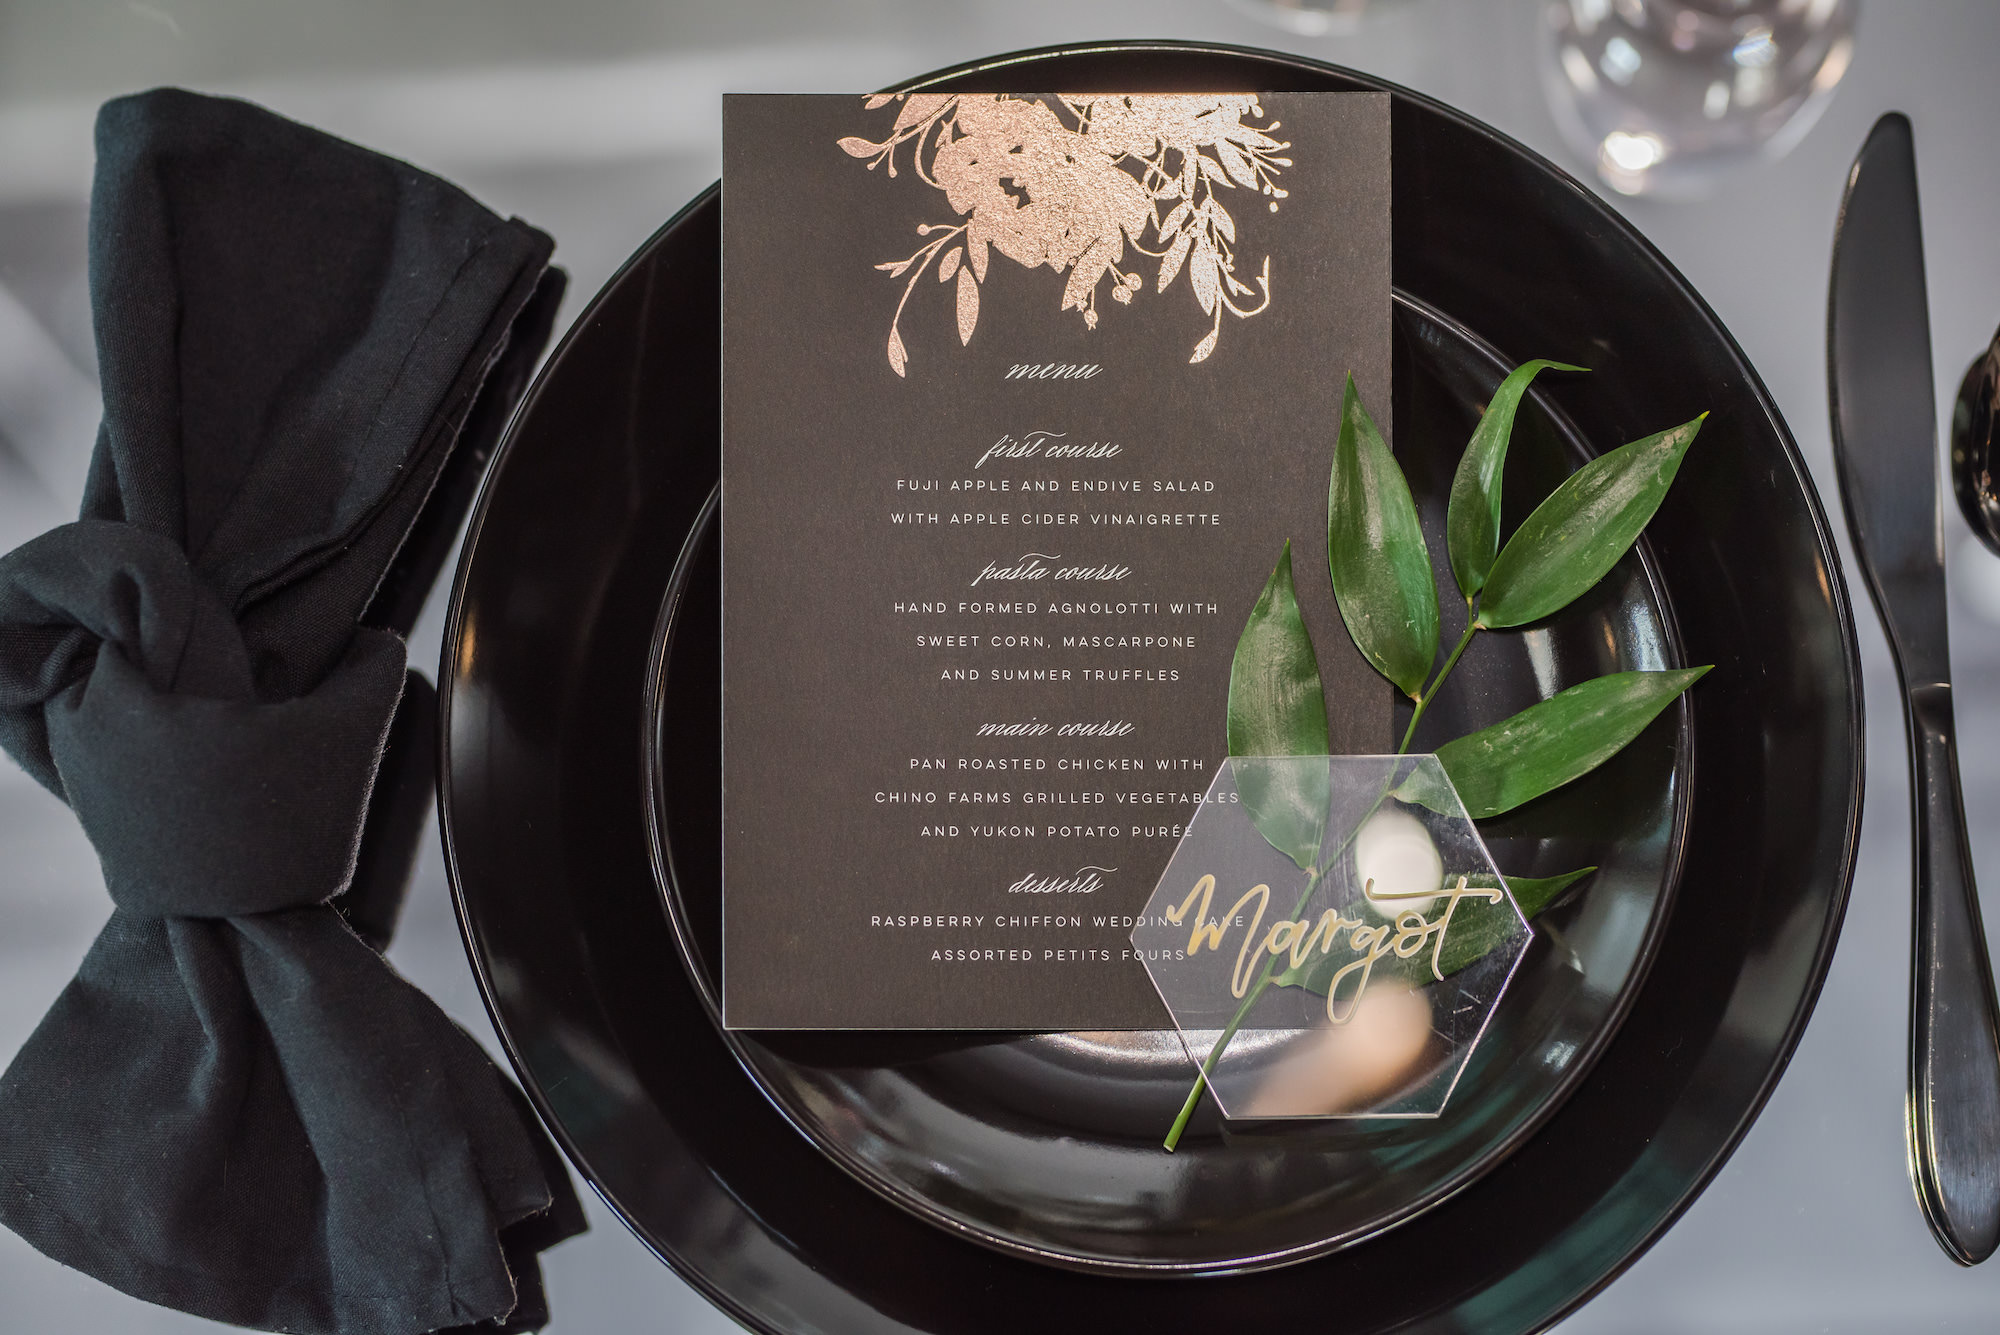 Dark Luxe, Romantic Wedding Reception Styled Shoot Decor, Black Tableware, Plates, Black and Rose Gold Wedding Menu, Geometric Acrylic and Gold Script Font Place Card | Tampa Bay Wedding Planner Elegant Affairs by Design